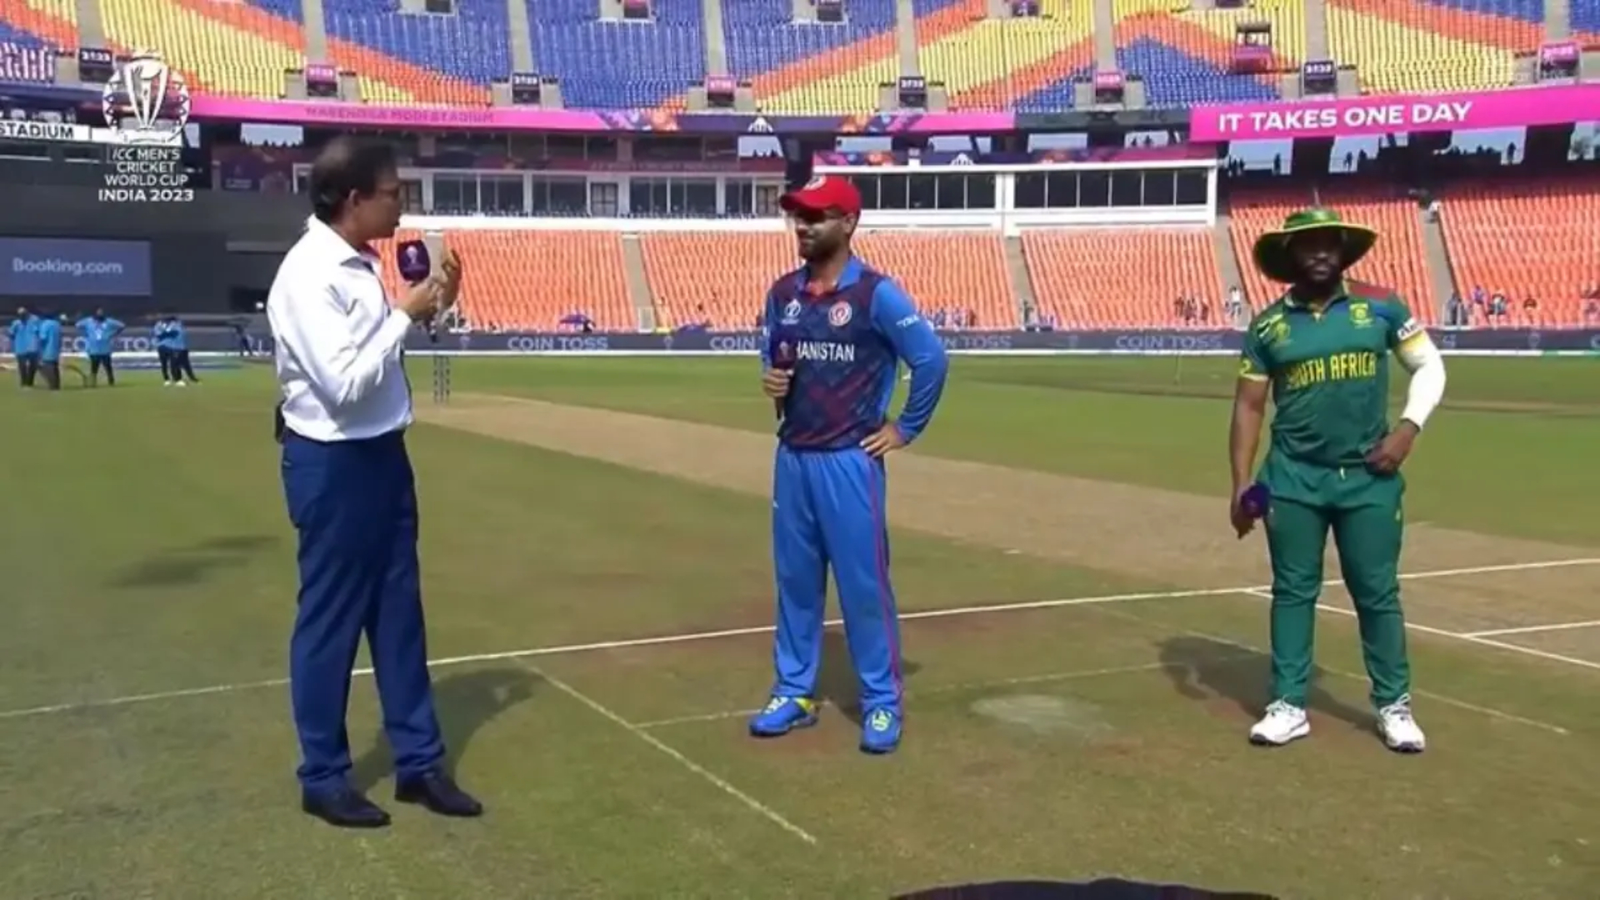 T20 World Cup: Afghanistan wins toss, elects to bat first against South Africa